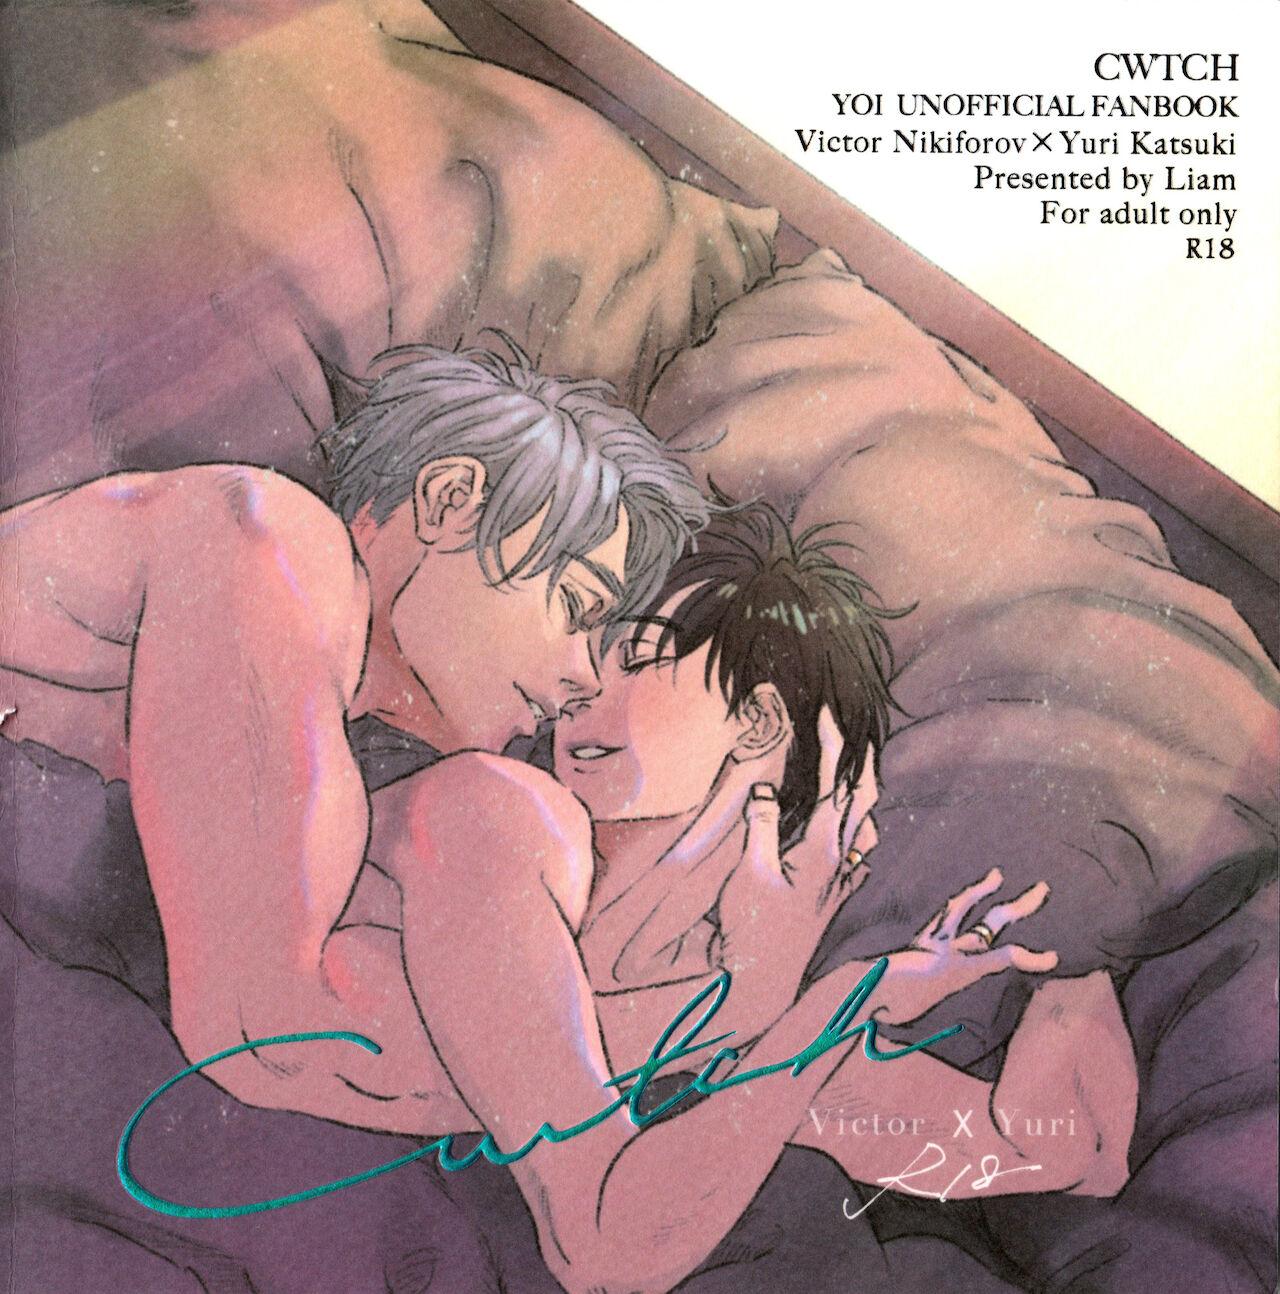 Smalltits CWTCH - Yuri on ice Japan - Picture 1